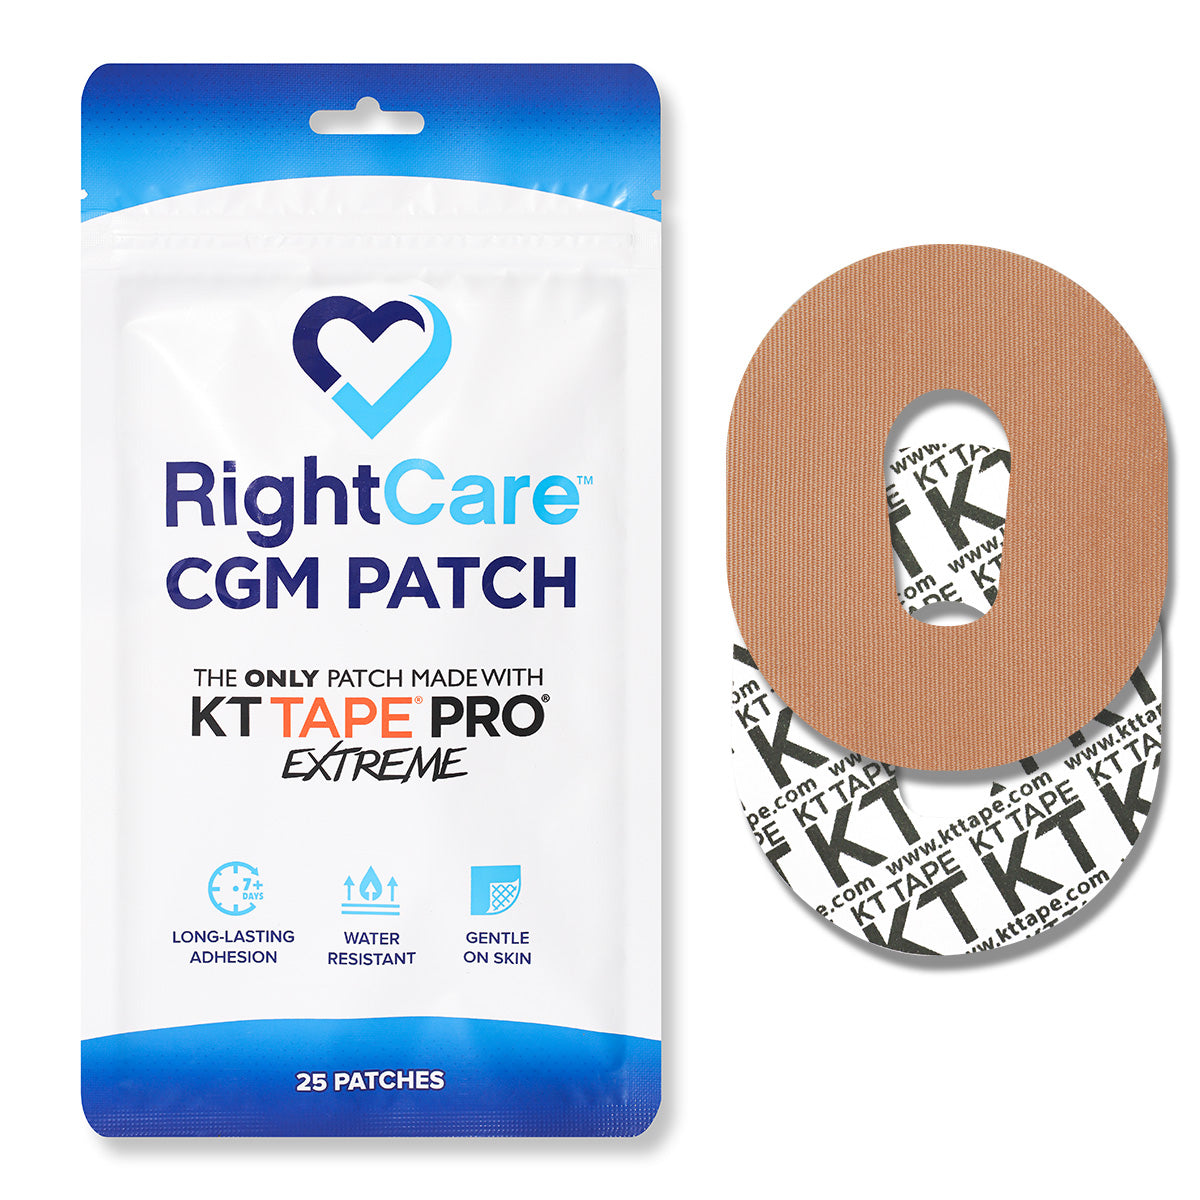 RightCare CGM Adhesive Patch made with KT Tape, Dexcom G6, Bag of 25 61538628